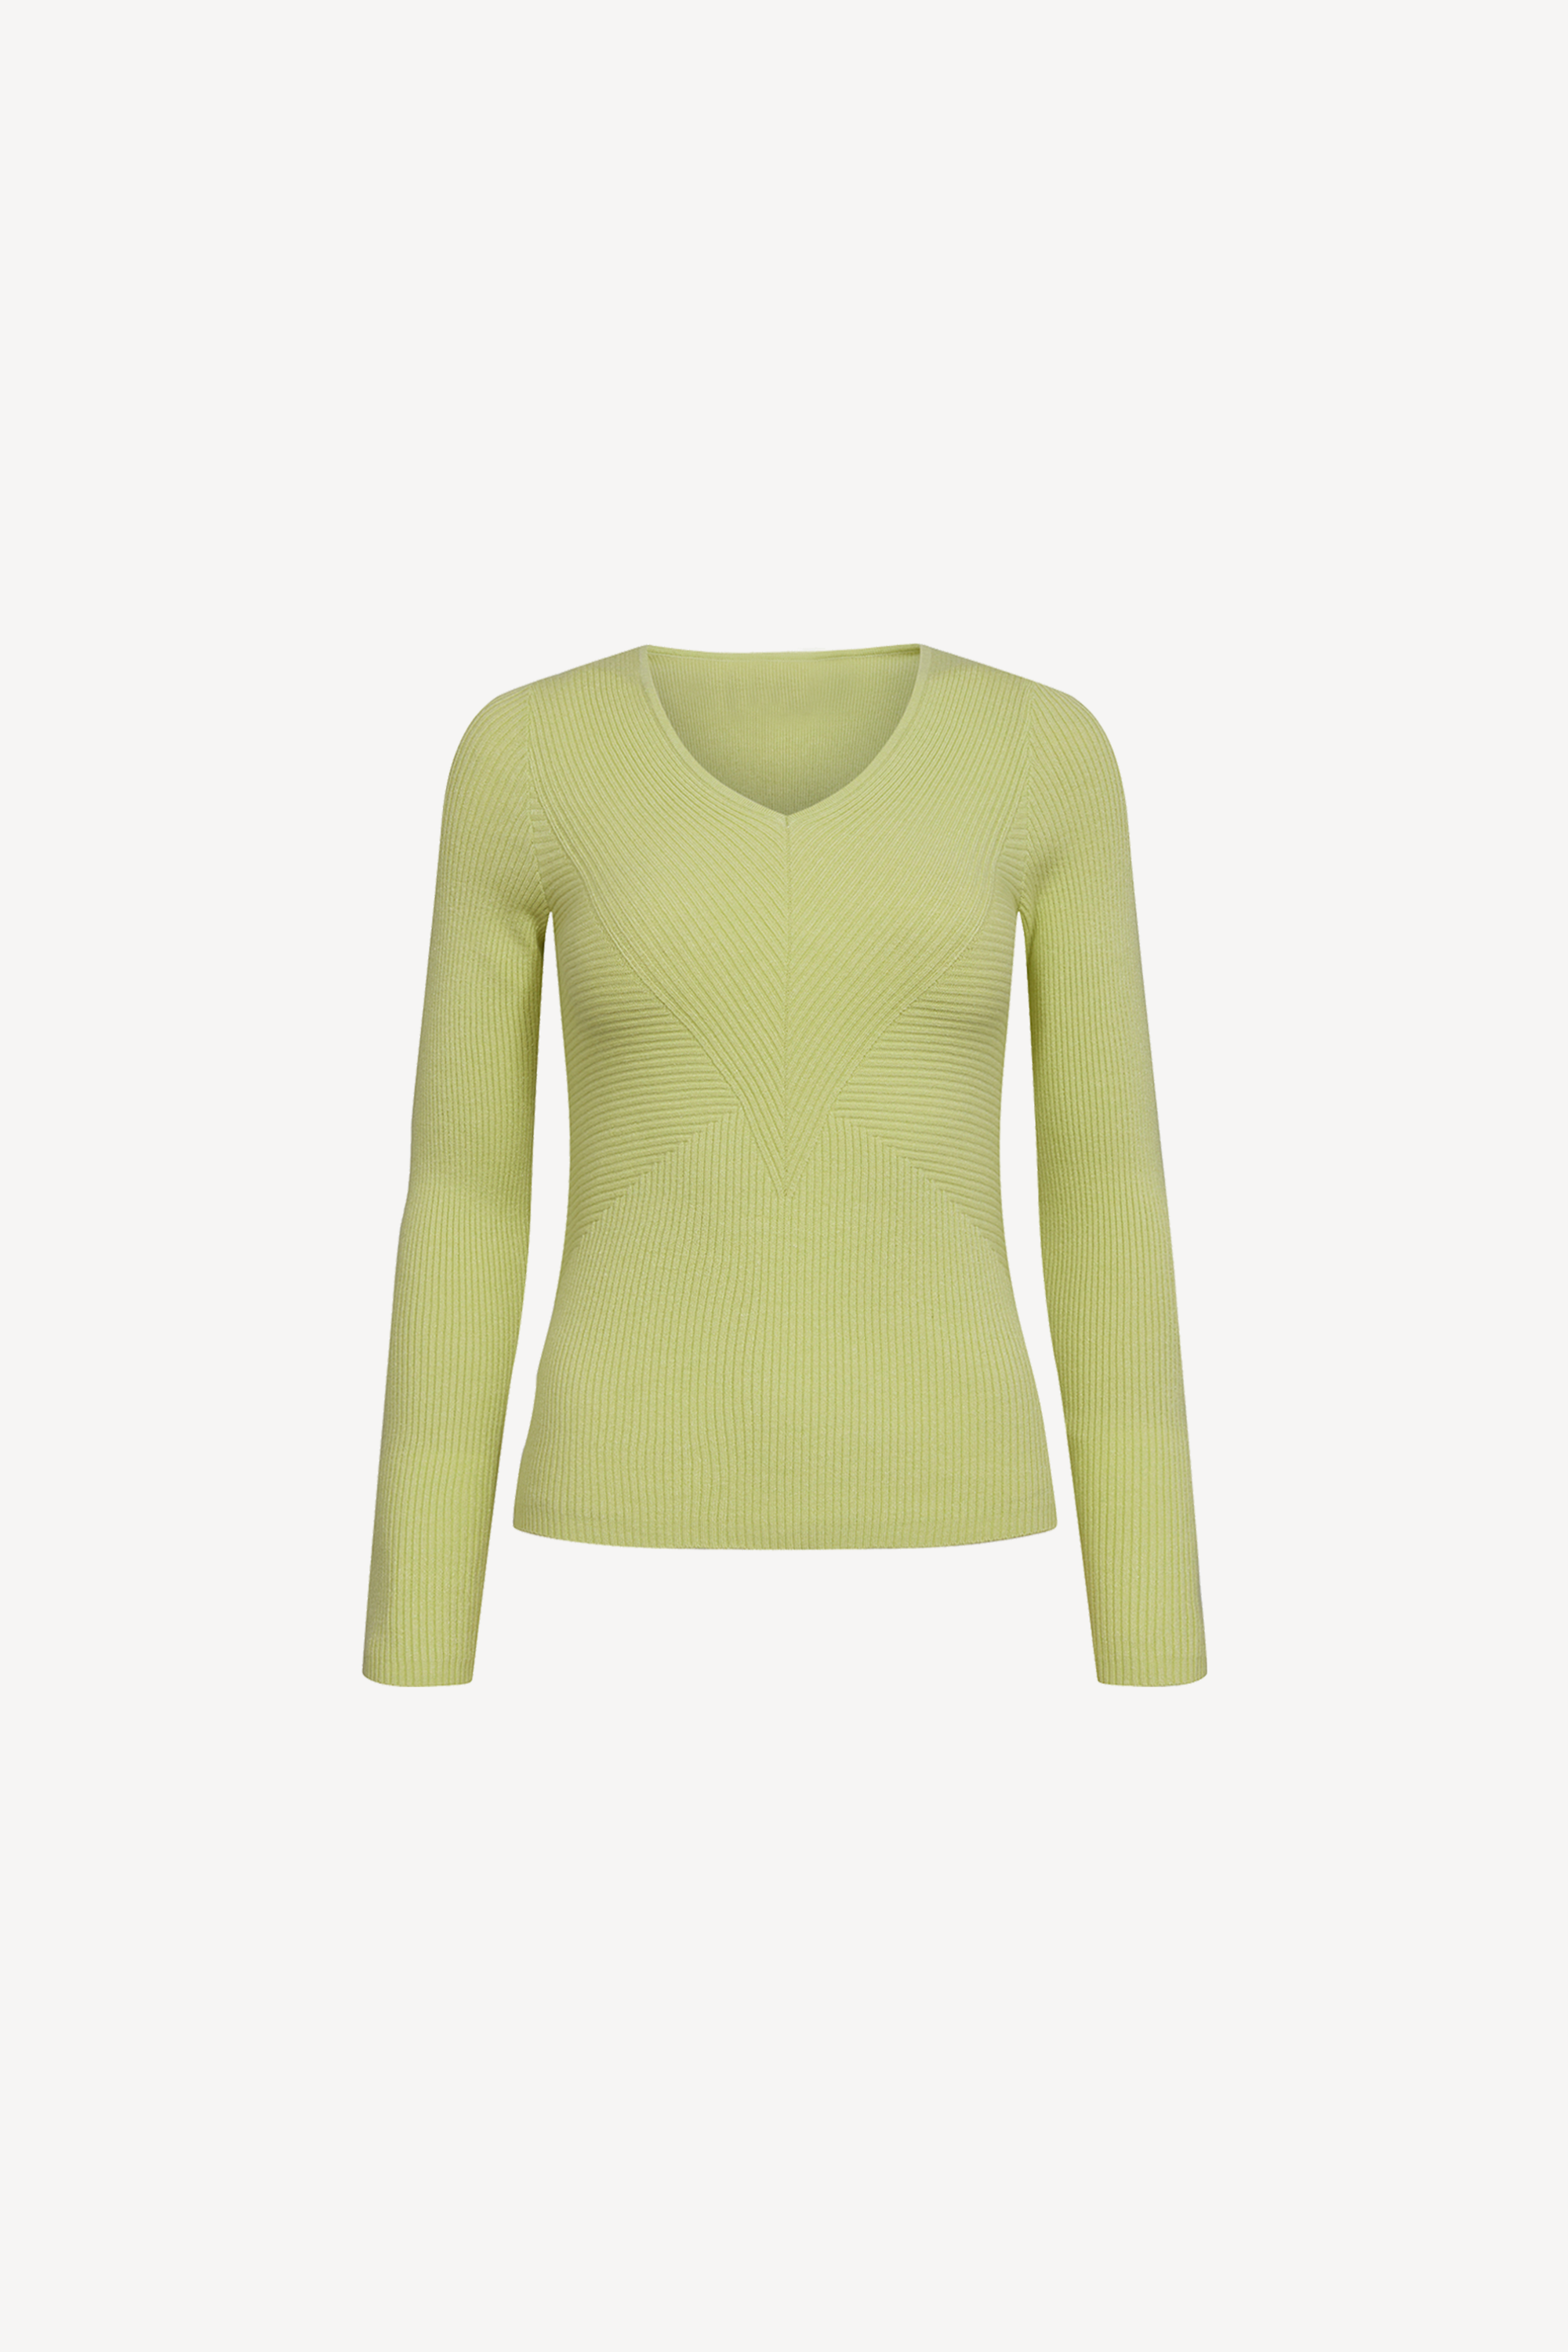 Kimmie Pullover Celery Green